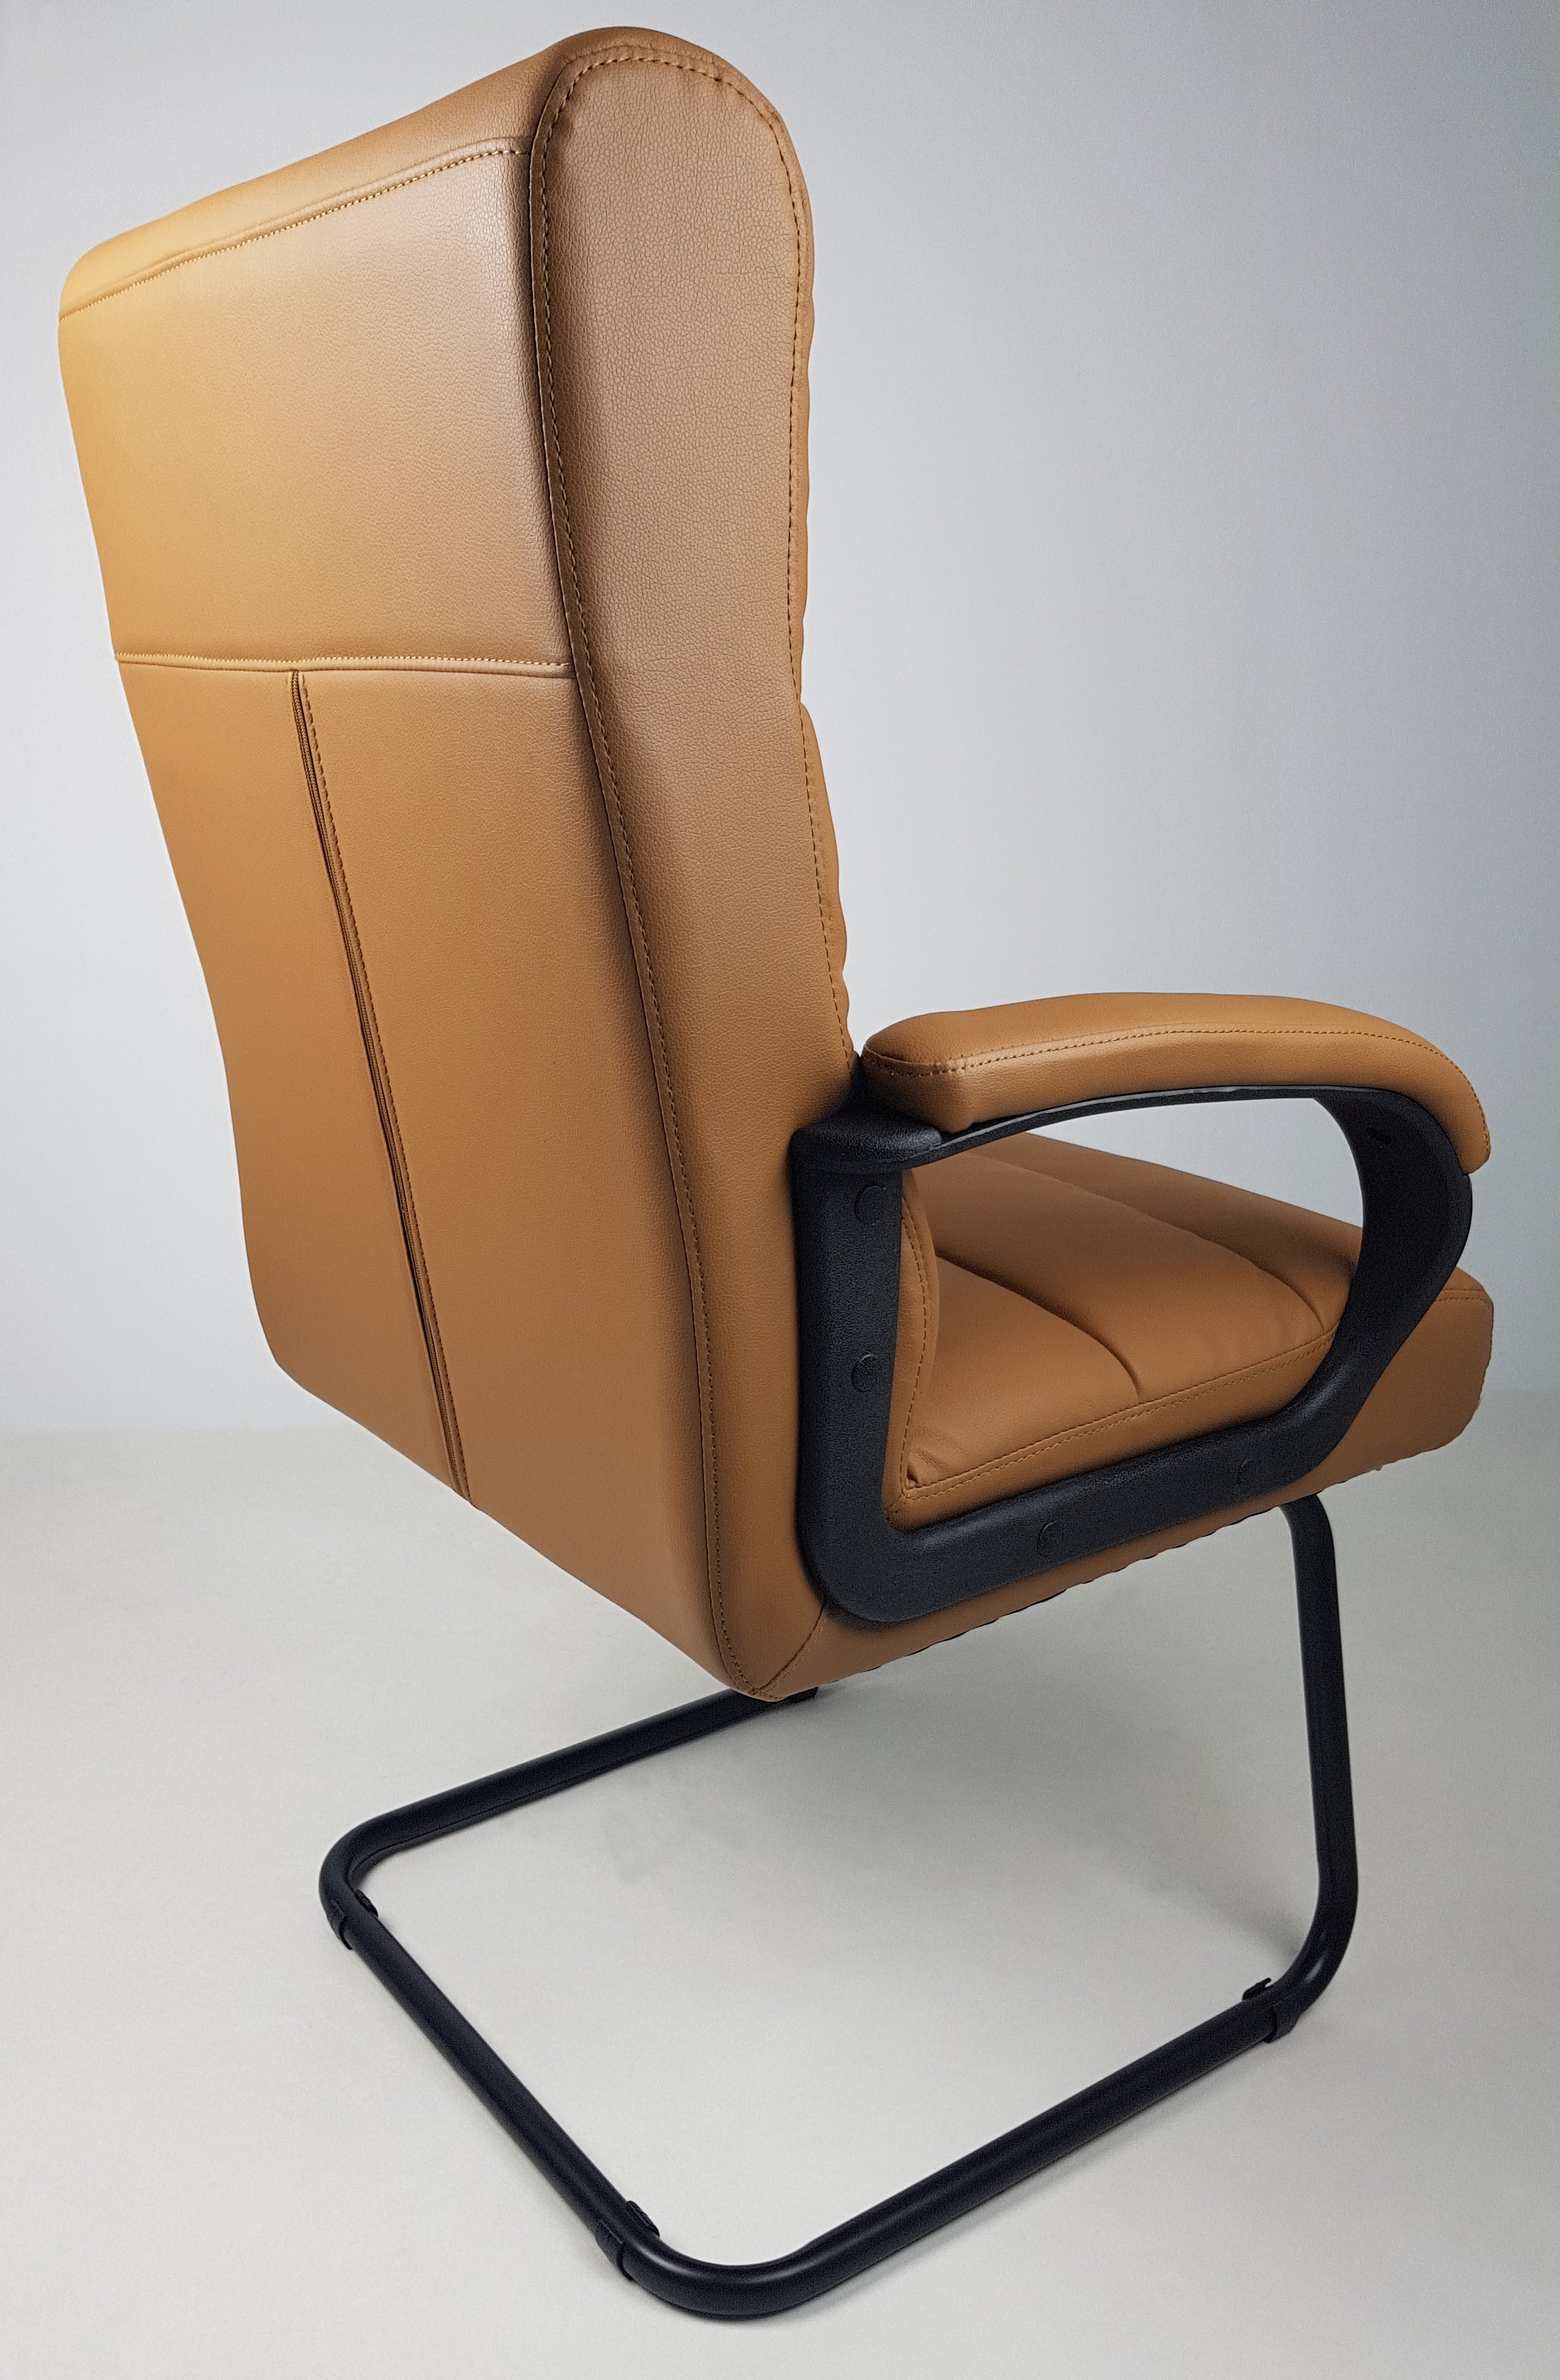 Soft Padded Visitor Office Chair in Beige - CHA-K35-2